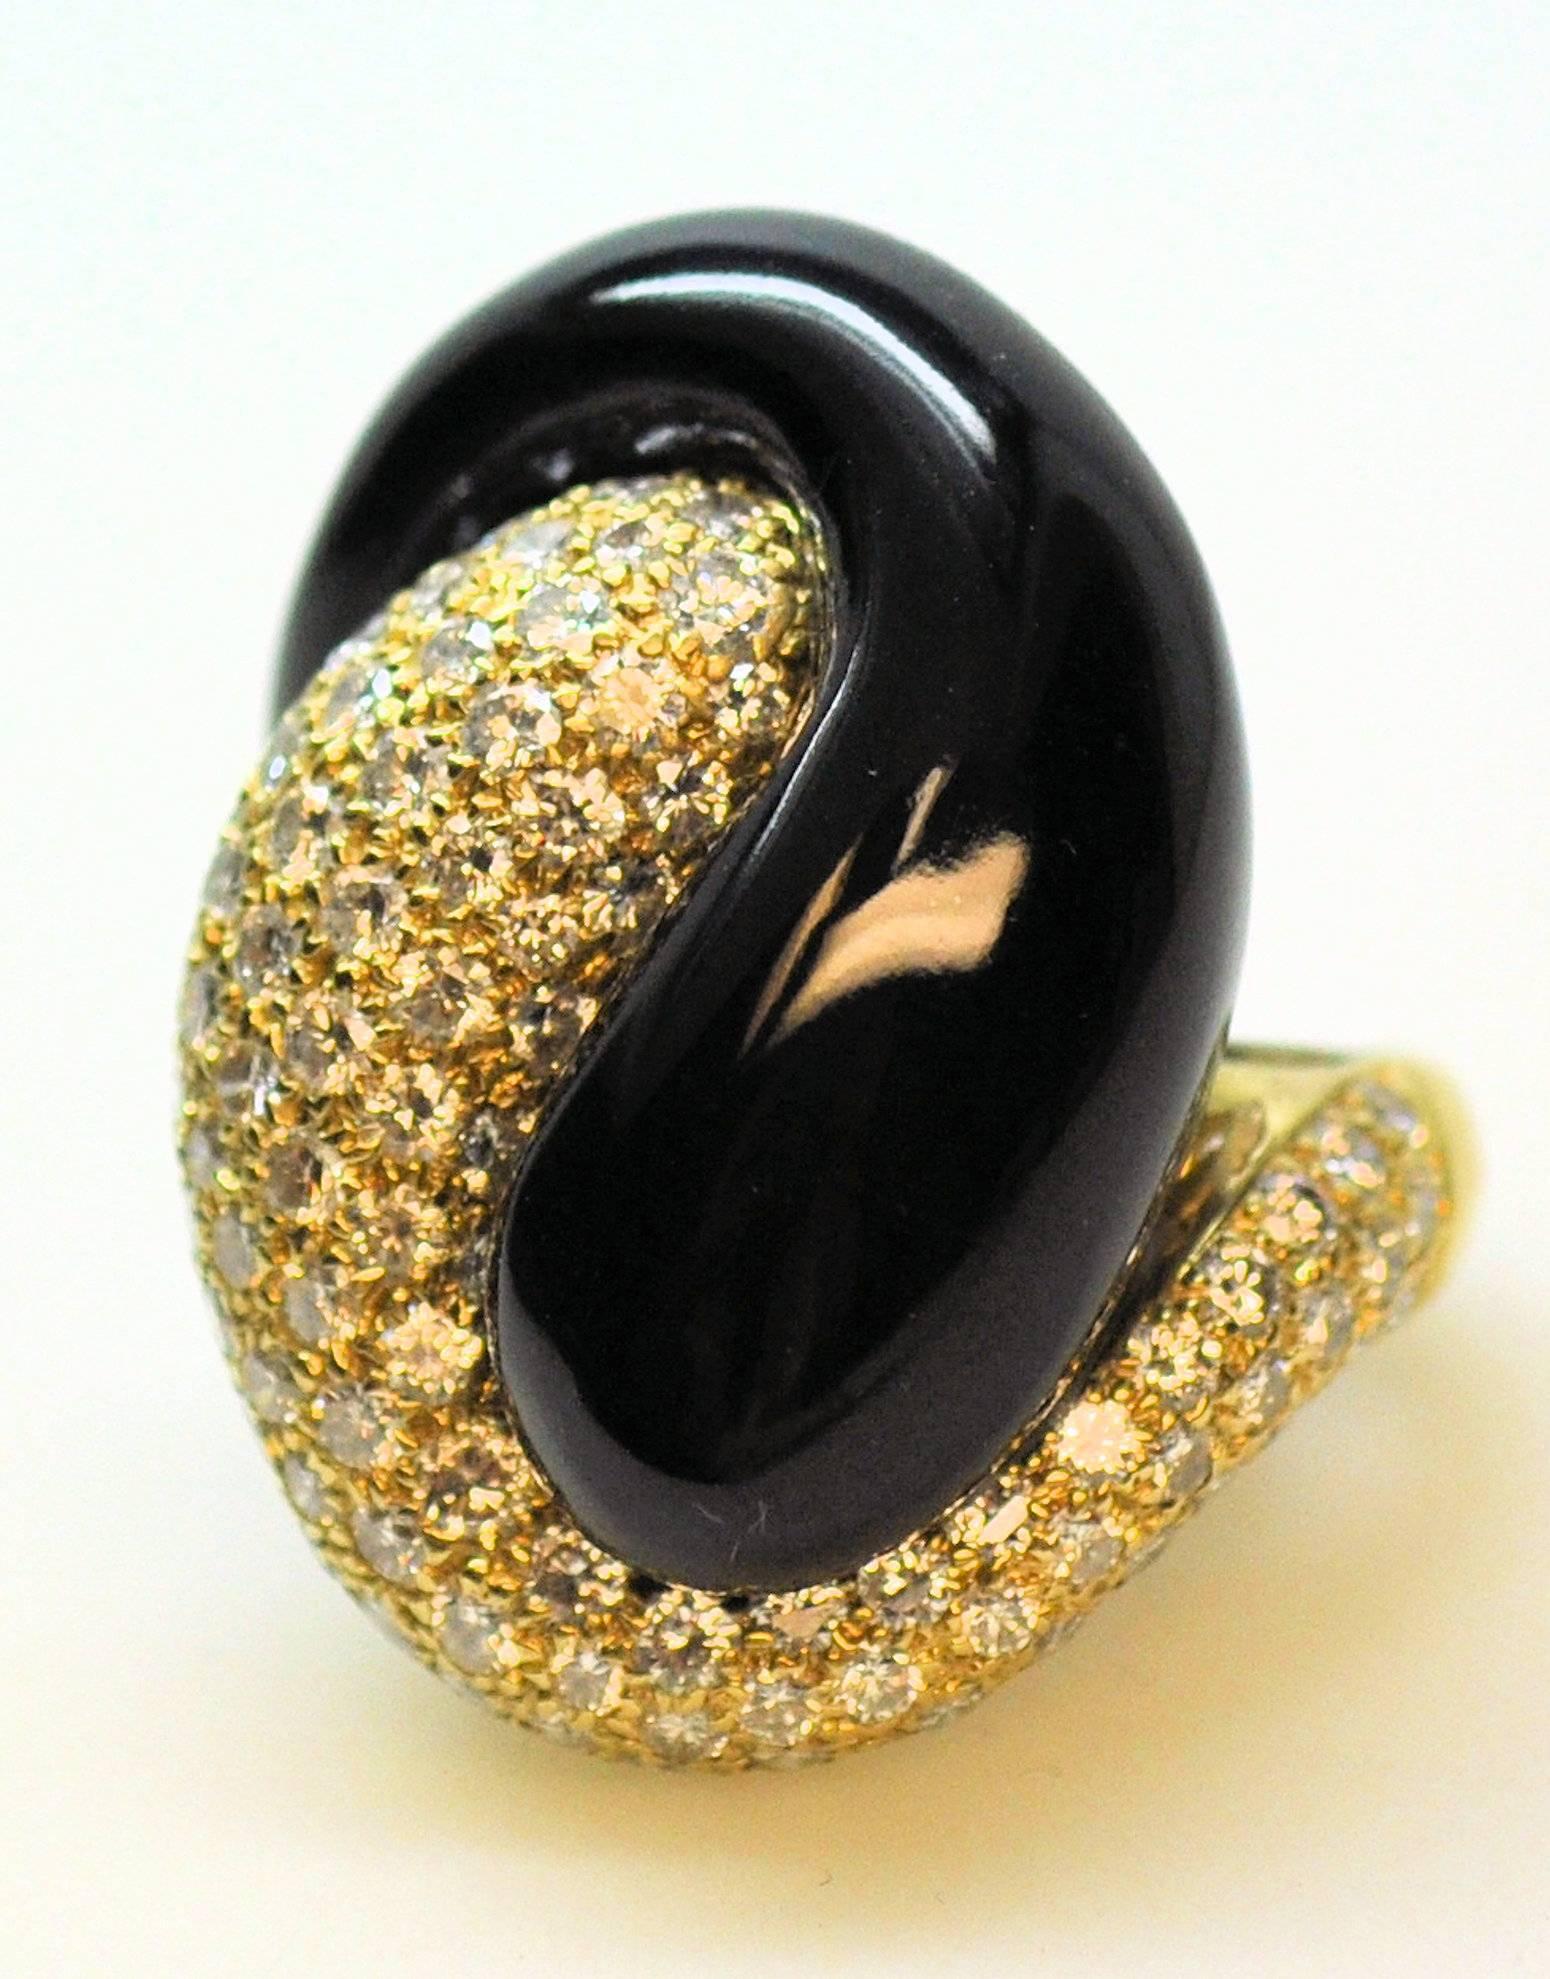 18 Karat yellow gold yin-yang style ring with diamond pave' set and custom cut black jade.  Set with 93 round brilliant cut diamonds 3.00 carats total weight of grade VVS-2, G. 11.9 dwt. gross wt.  This ring has attached horseshoe guard, so the ring